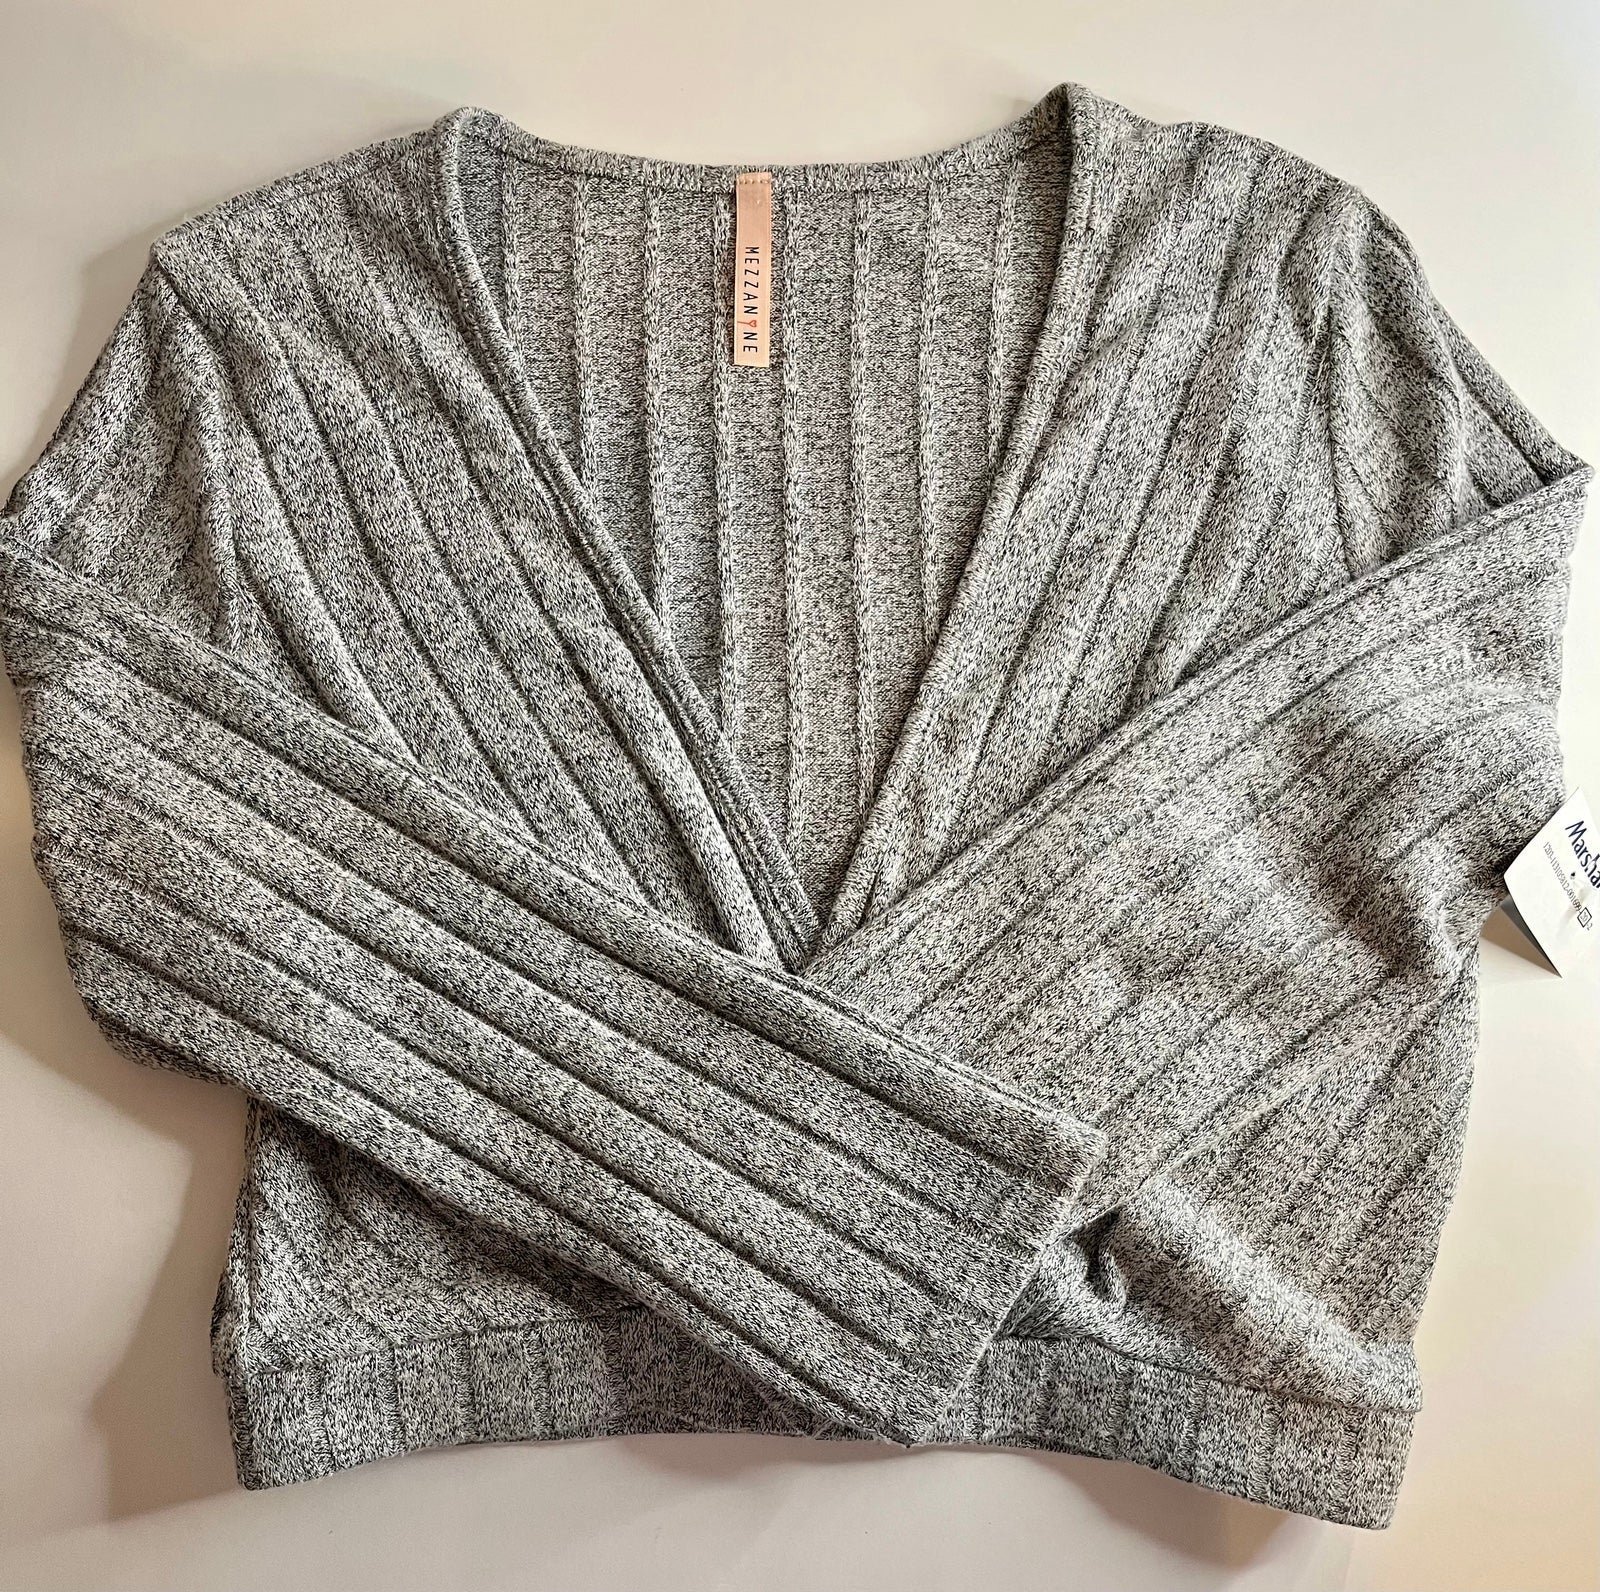 save up to 70% (NWT) MEZZANINE BOUTIQUE GRAY KNIT CROP TOP, SIZE SMALL OBpkIzkL0 Discount